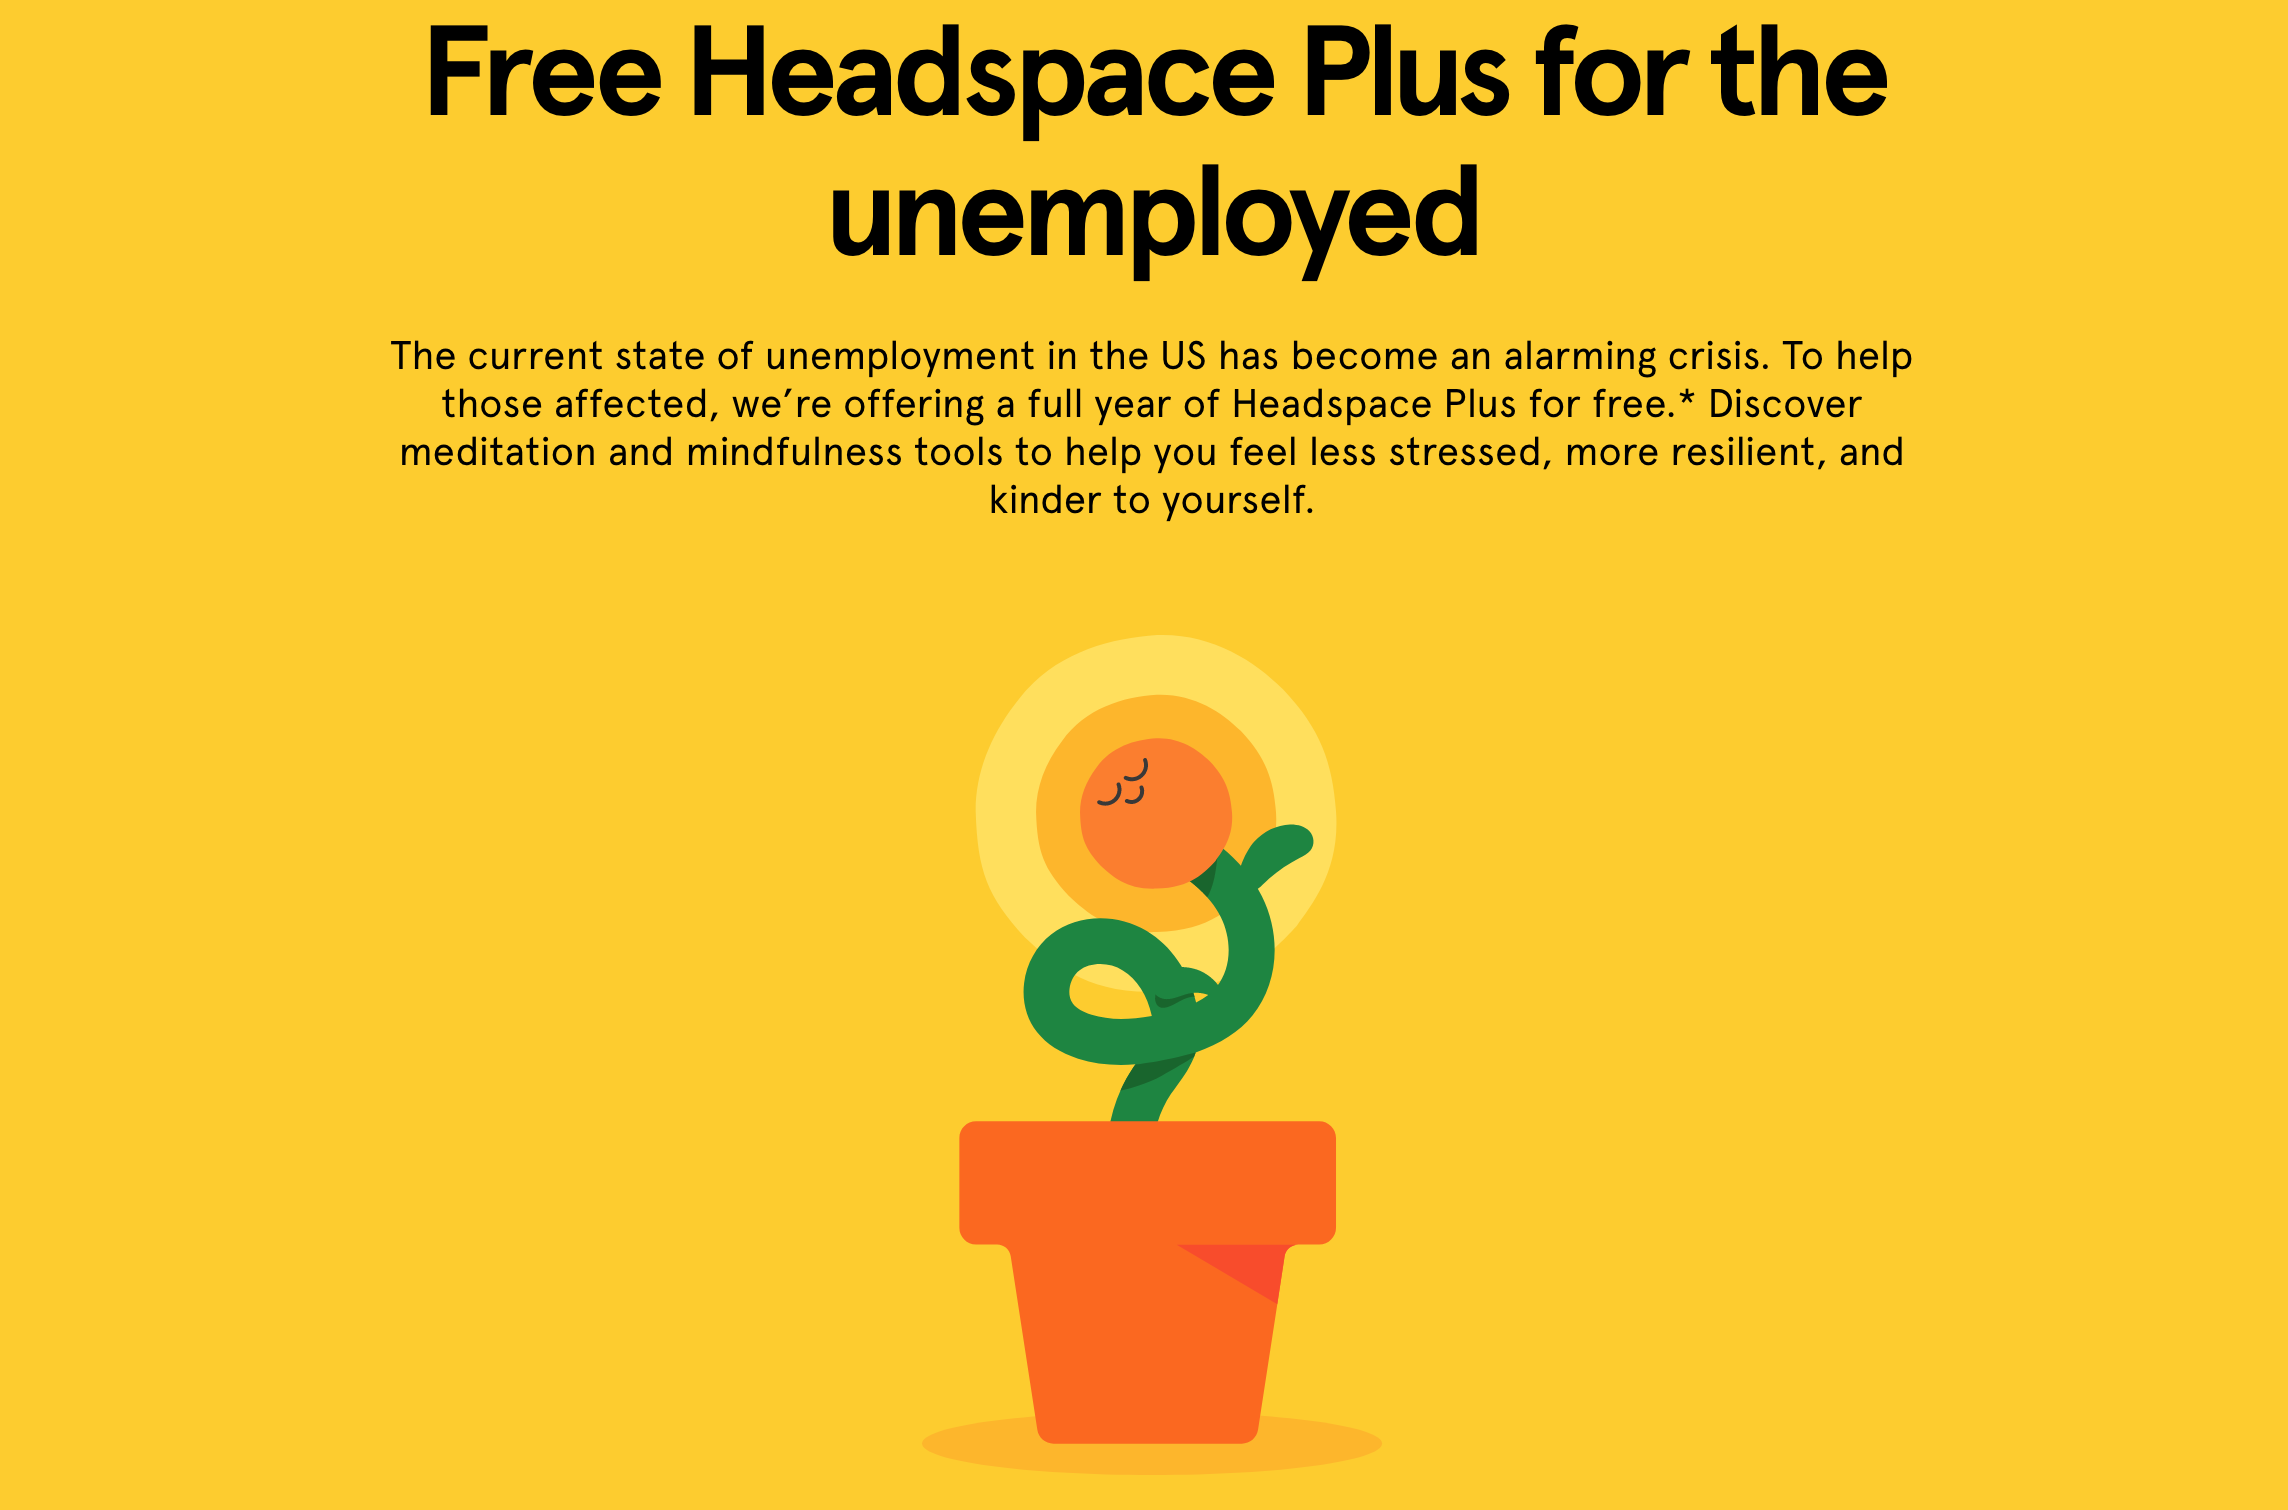 Headspace Plus is free for unemployed and health carers in the US